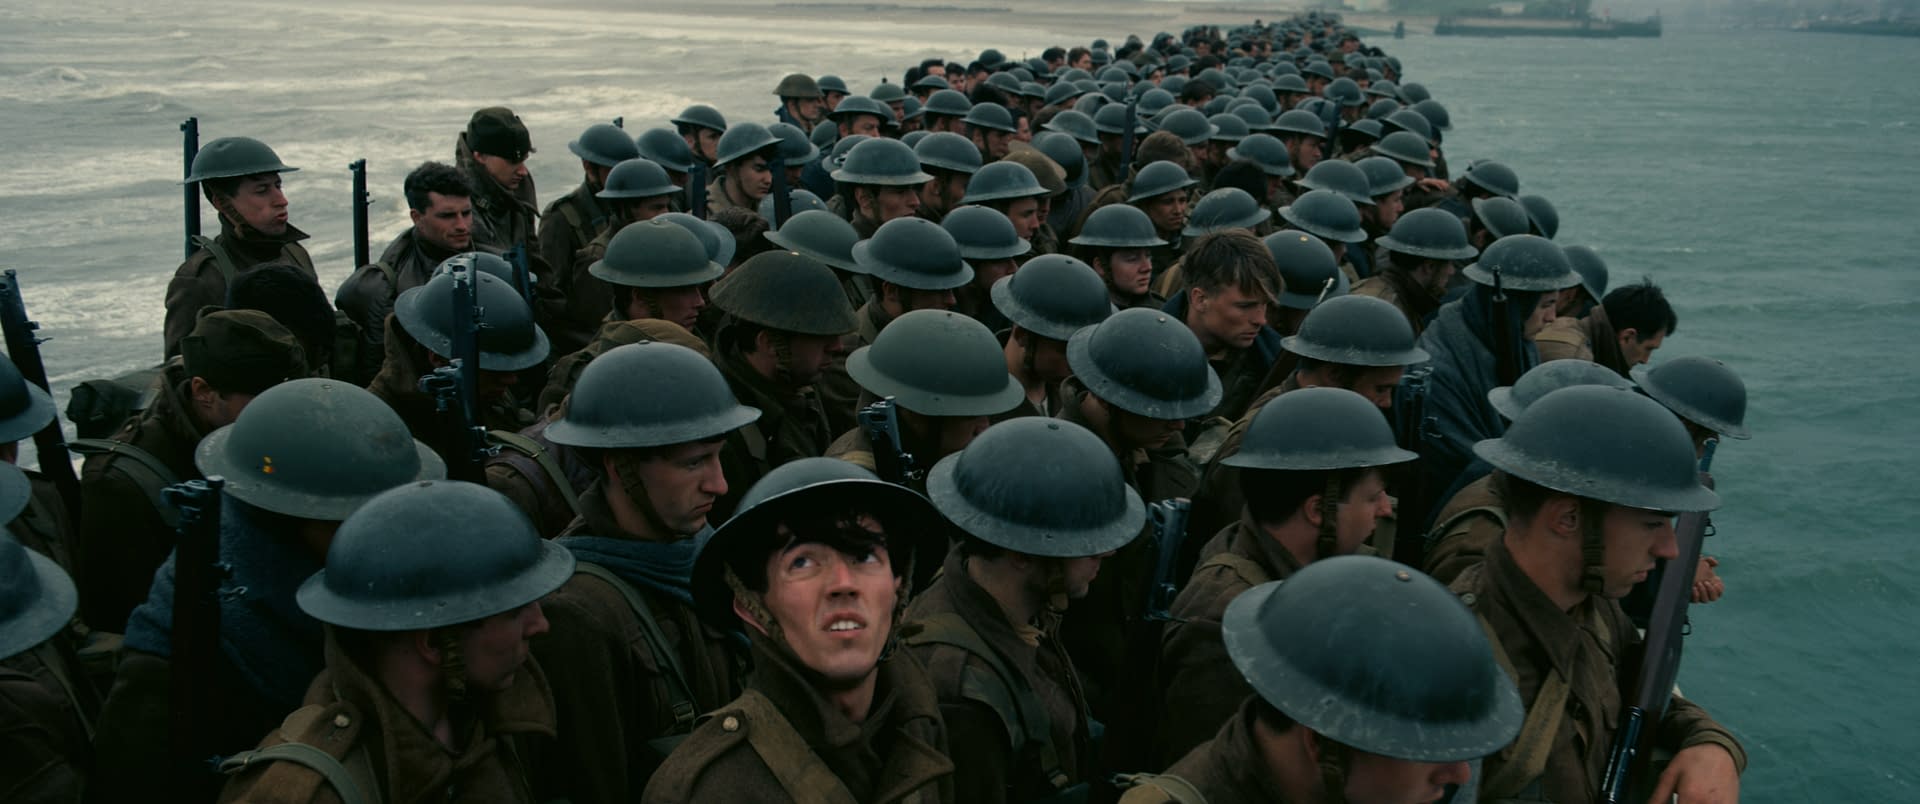 A TV Spot, A Featurette, A Track From The OST, And 15+ Images From 'Dunkirk'